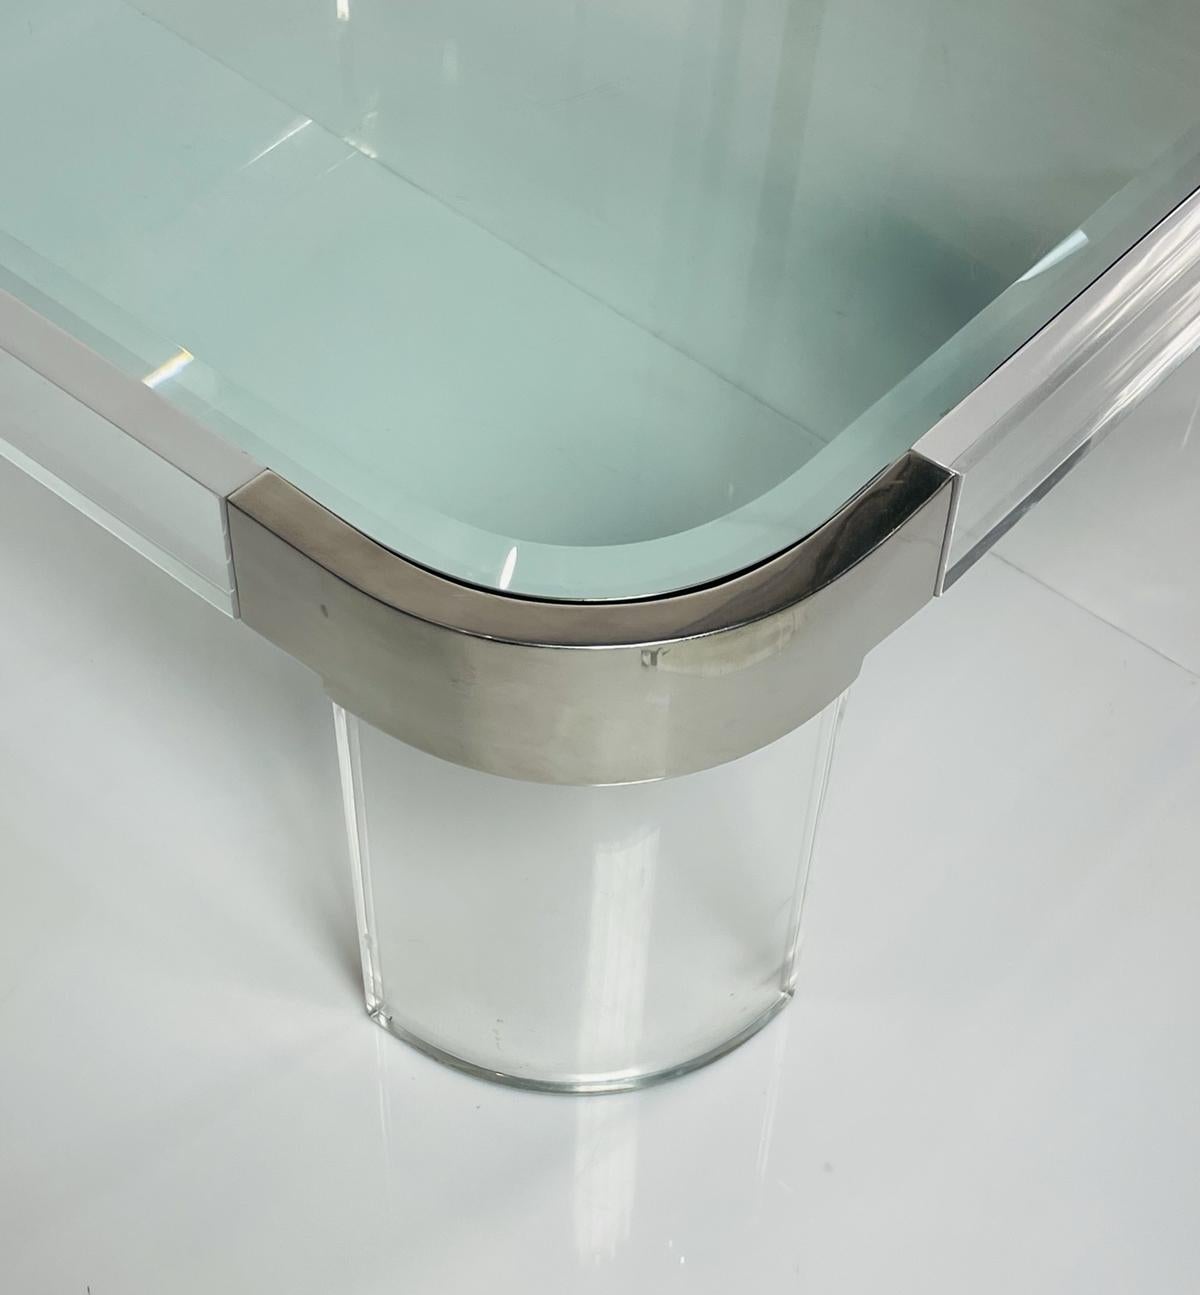 Charles Hollis Jones Waterfall Coffee Table in Lucite, Glass & Polished Nickel For Sale 1